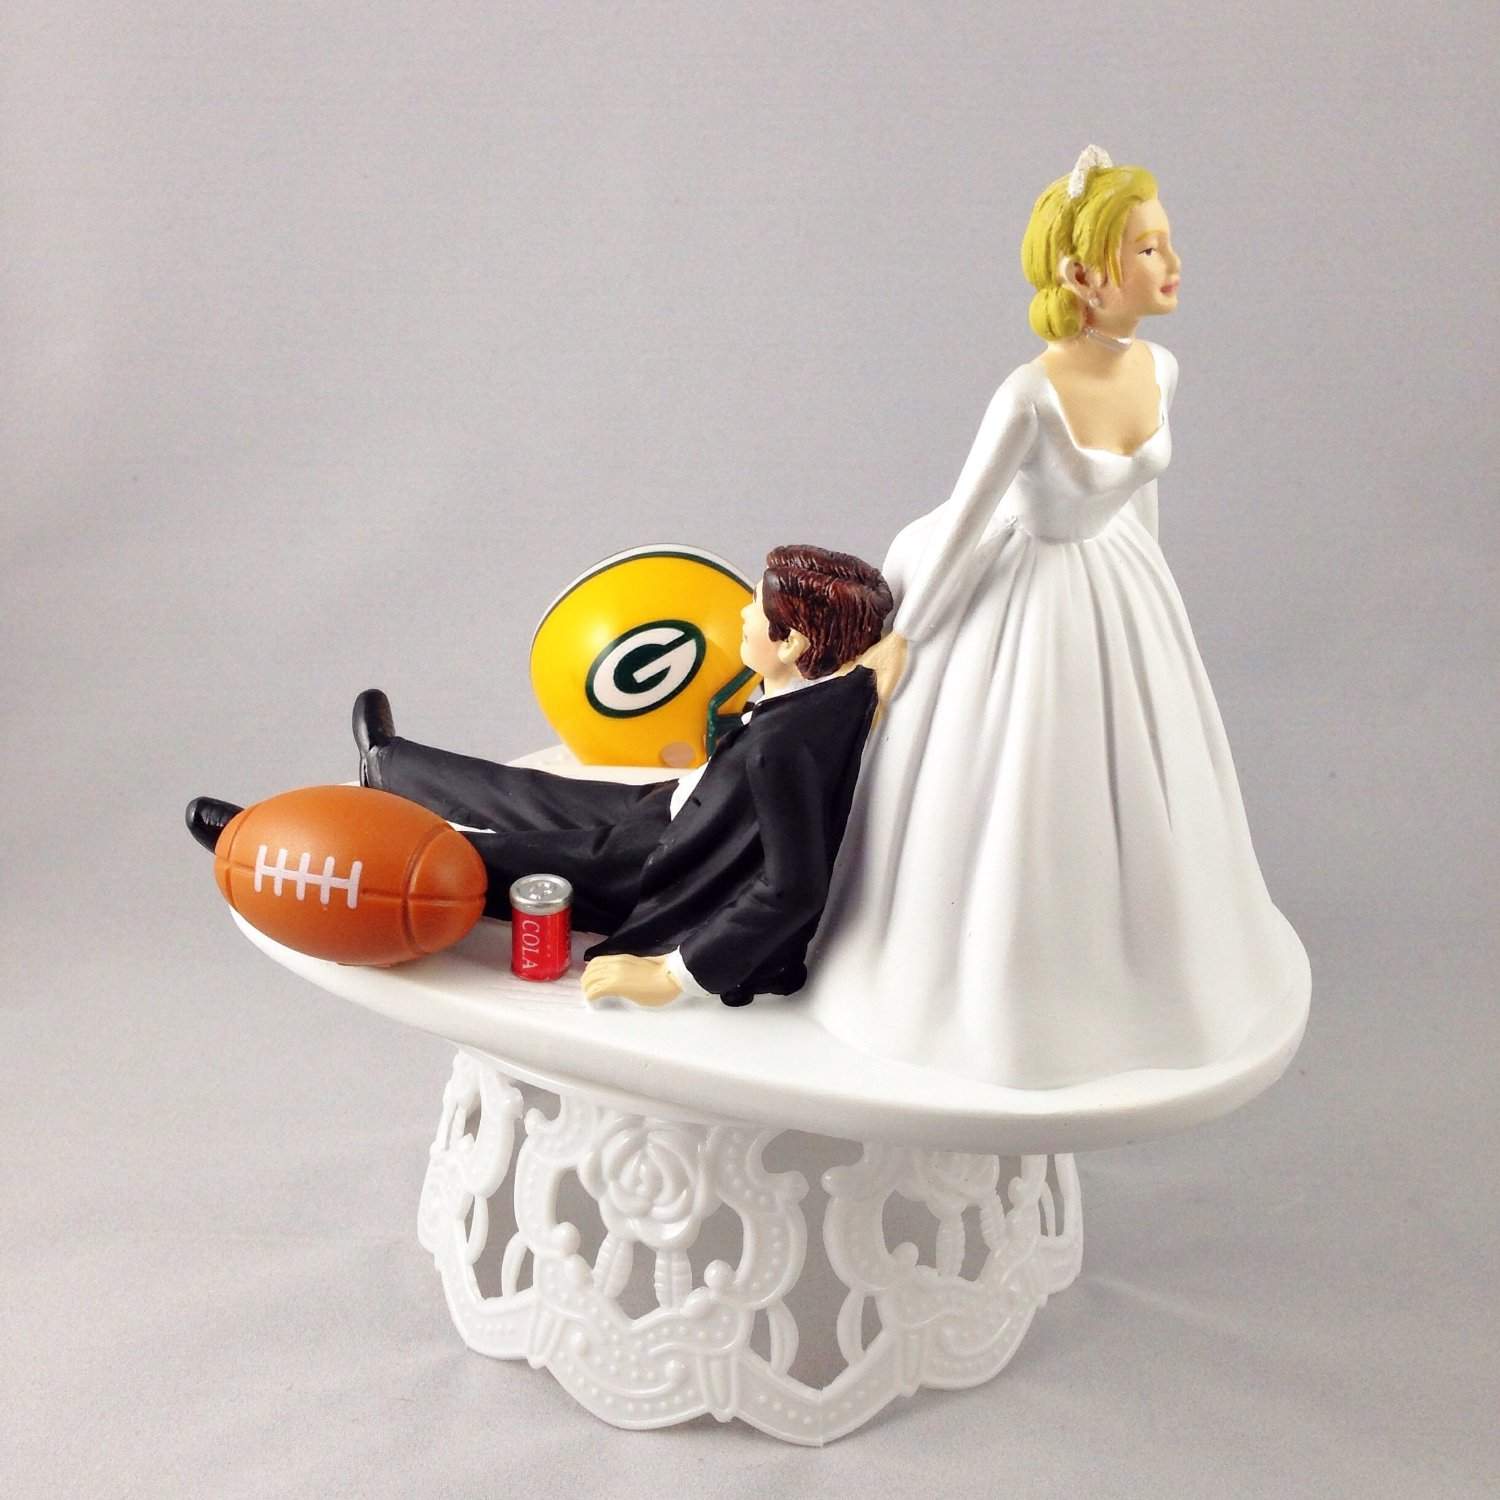 Funny Wedding Cake Toppers Ireland ~ 15 Funny Wedding Cake Toppers To Make Your Guests Laugh